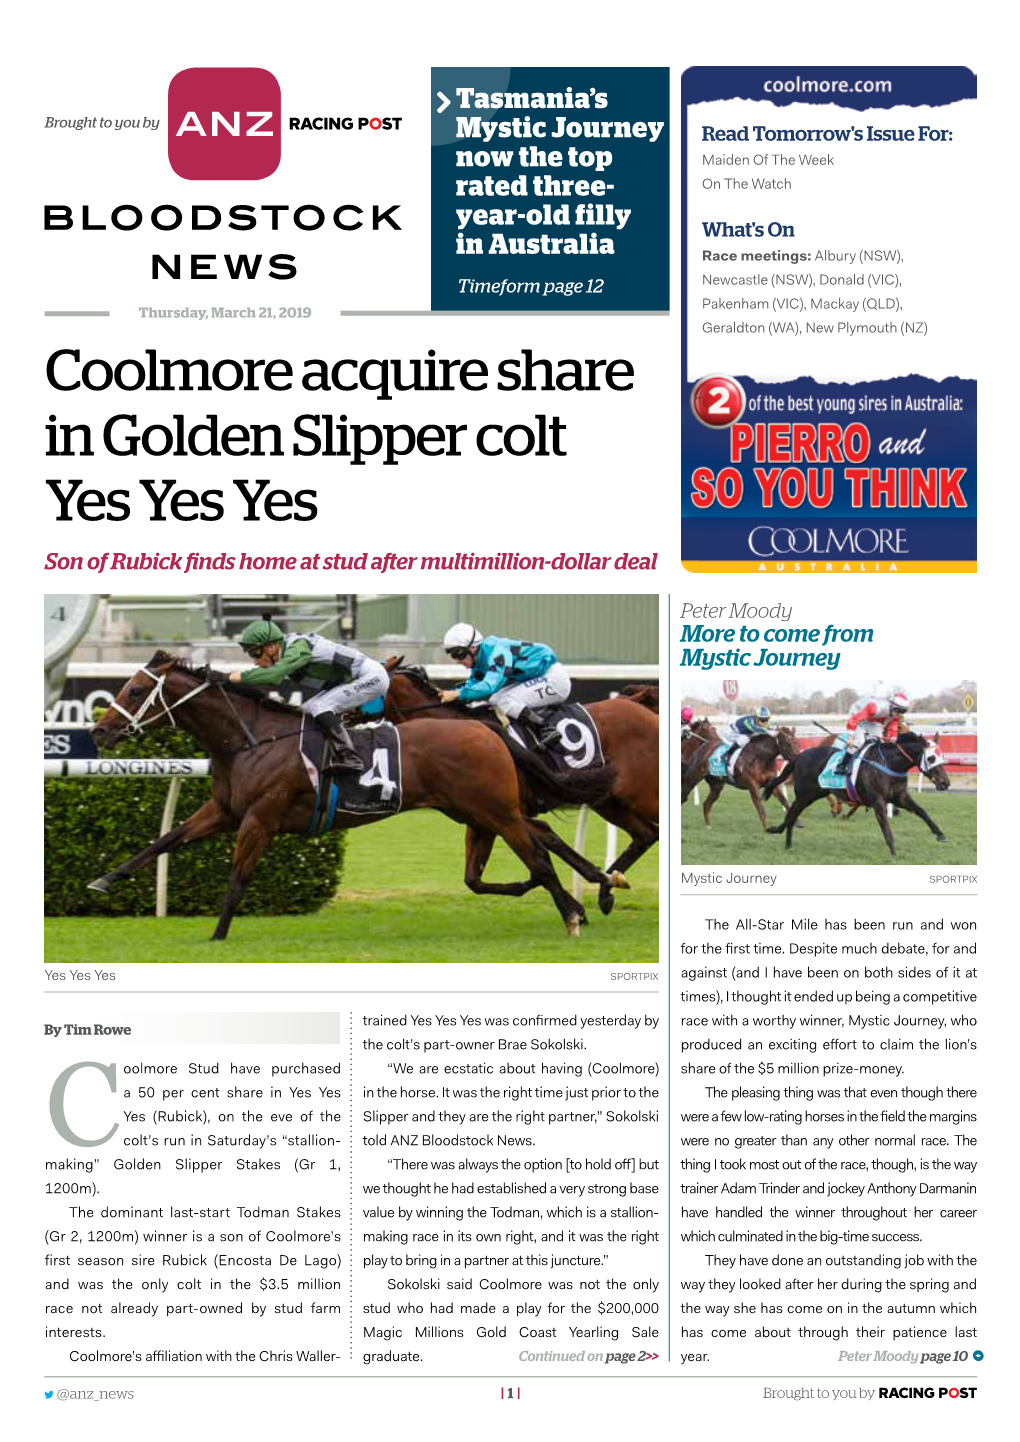 Coolmore Acquire Share in Golden Slipper Colt Yes Yes Yes Son of Rubick Finds Home at Stud After Multimillion-Dollar Deal